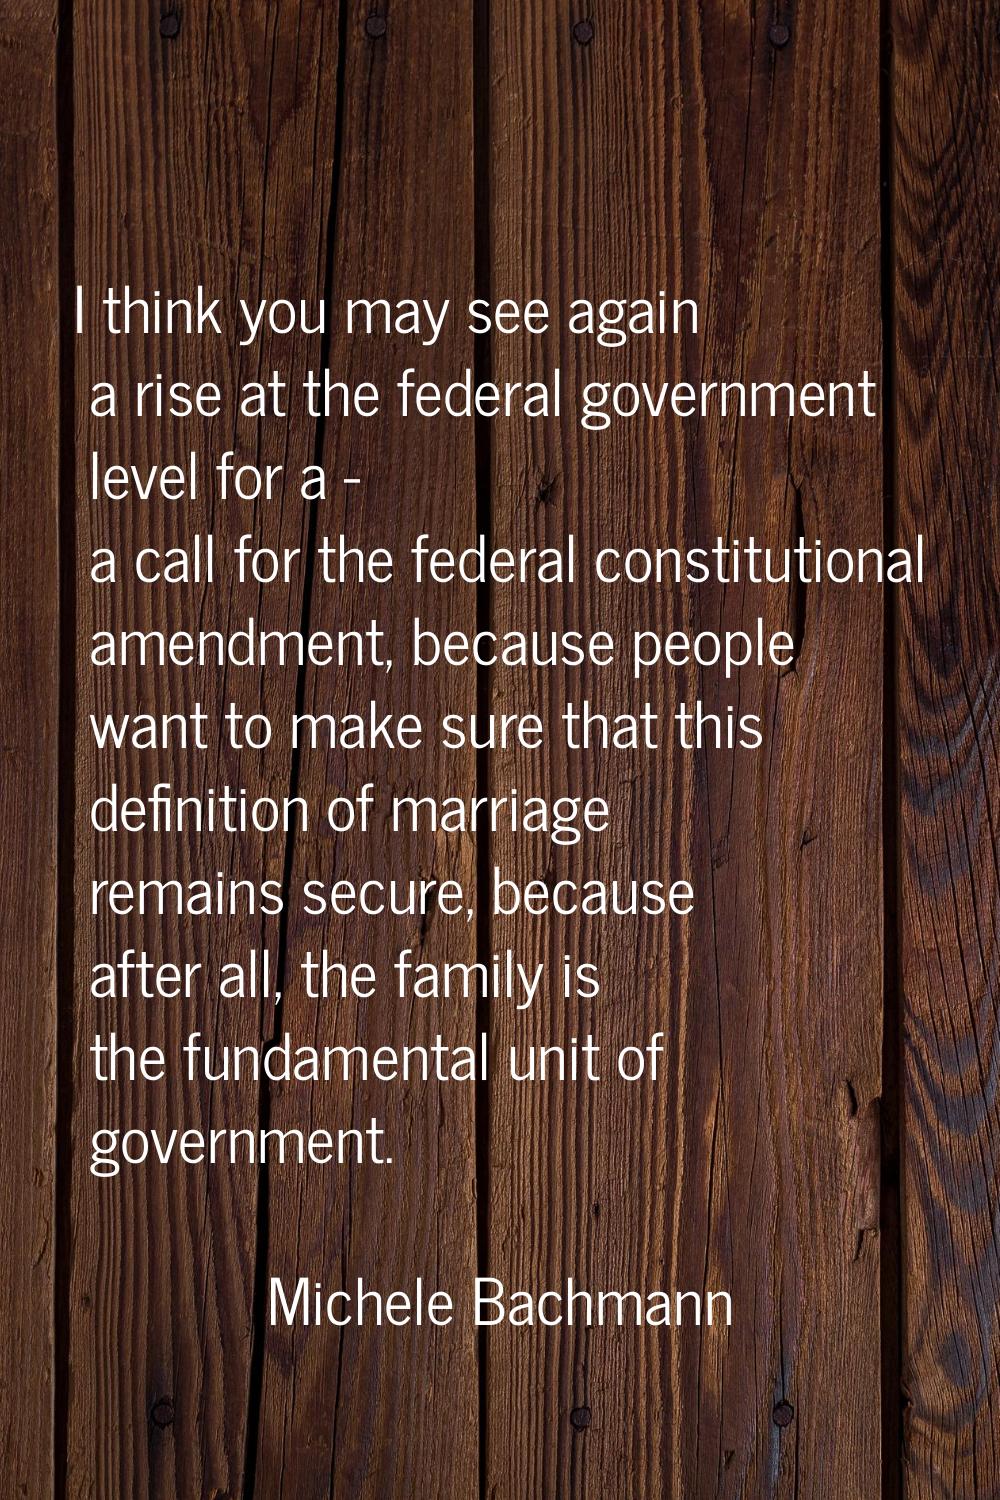 I think you may see again a rise at the federal government level for a - a call for the federal con